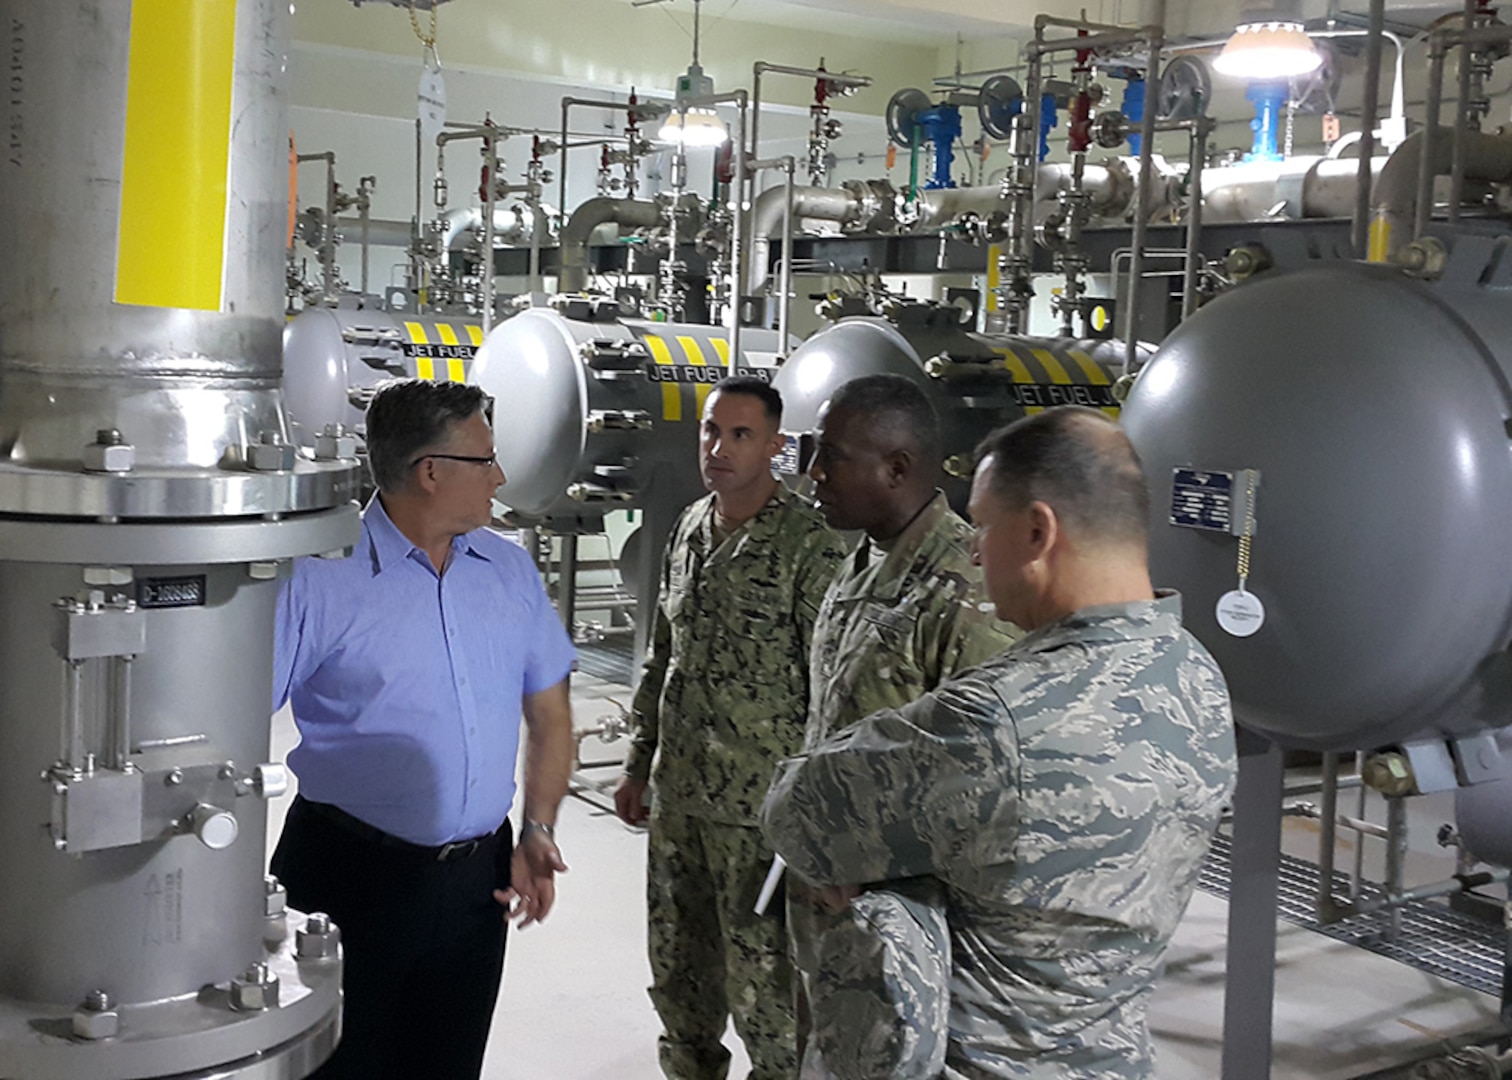 DLA director visits Defense Fuel Support Point with two other leaders